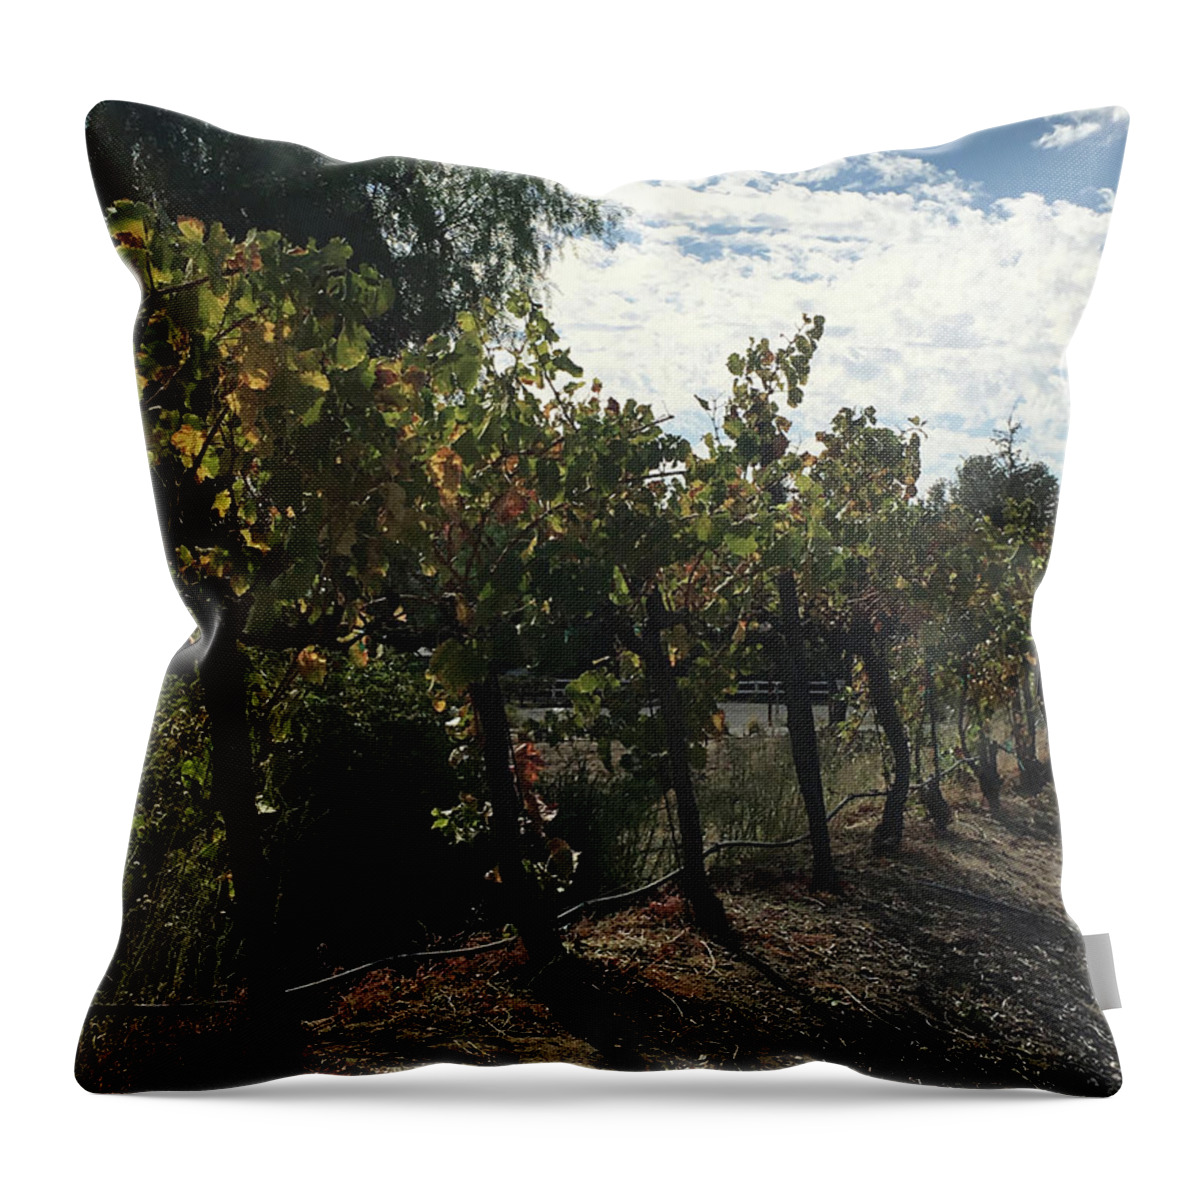 Grapevines Throw Pillow featuring the photograph Temecula Vines by Roxy Rich